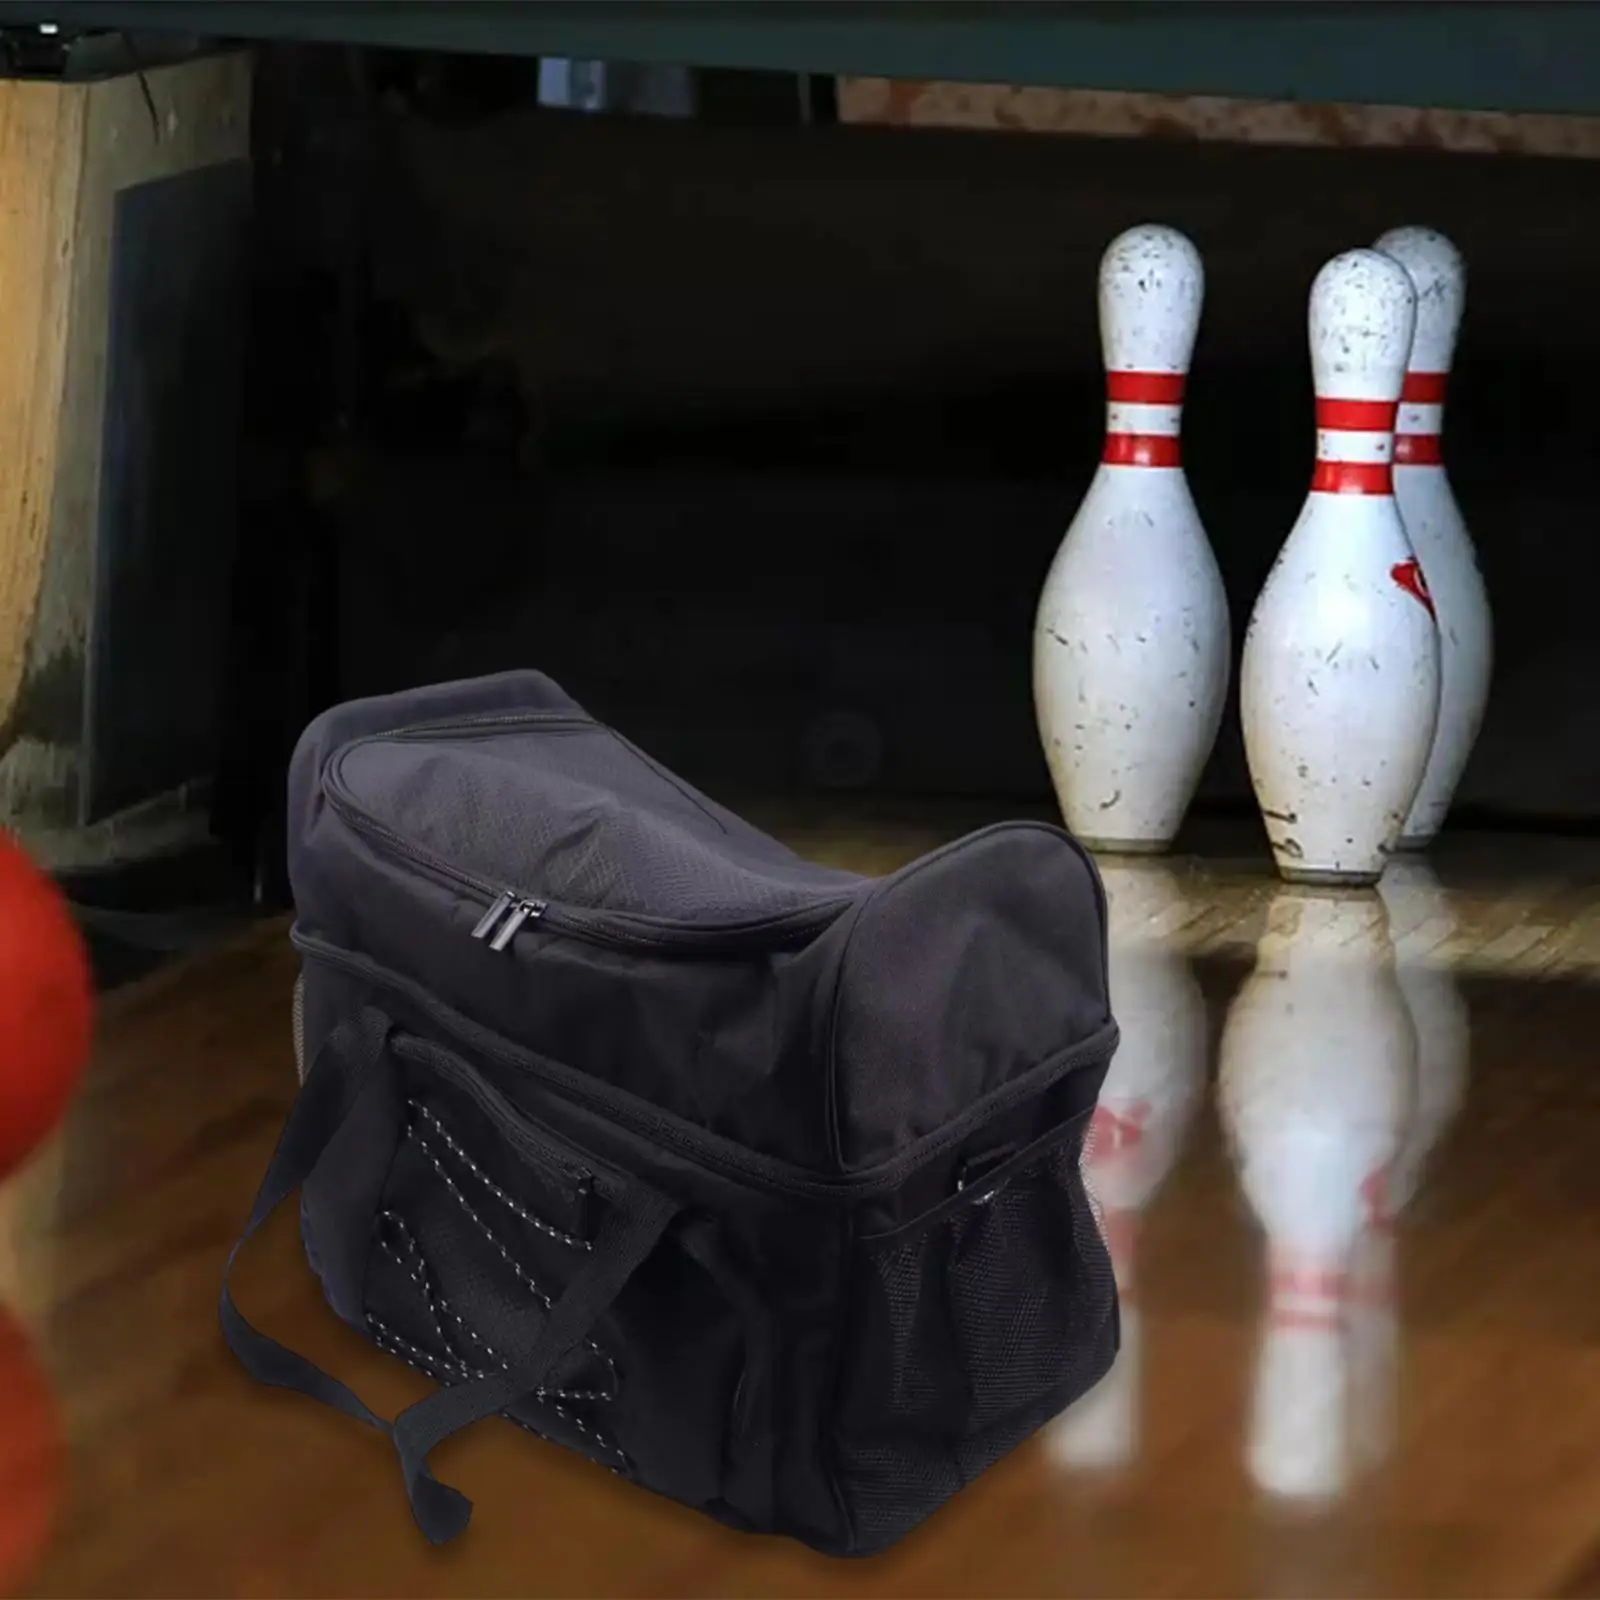 Bowling Ball Tote with Padded Divider Nylon Ball Holder Protective Bowling Ball Bag Pouch Fits Bowling Shoes up to Mens Size 16